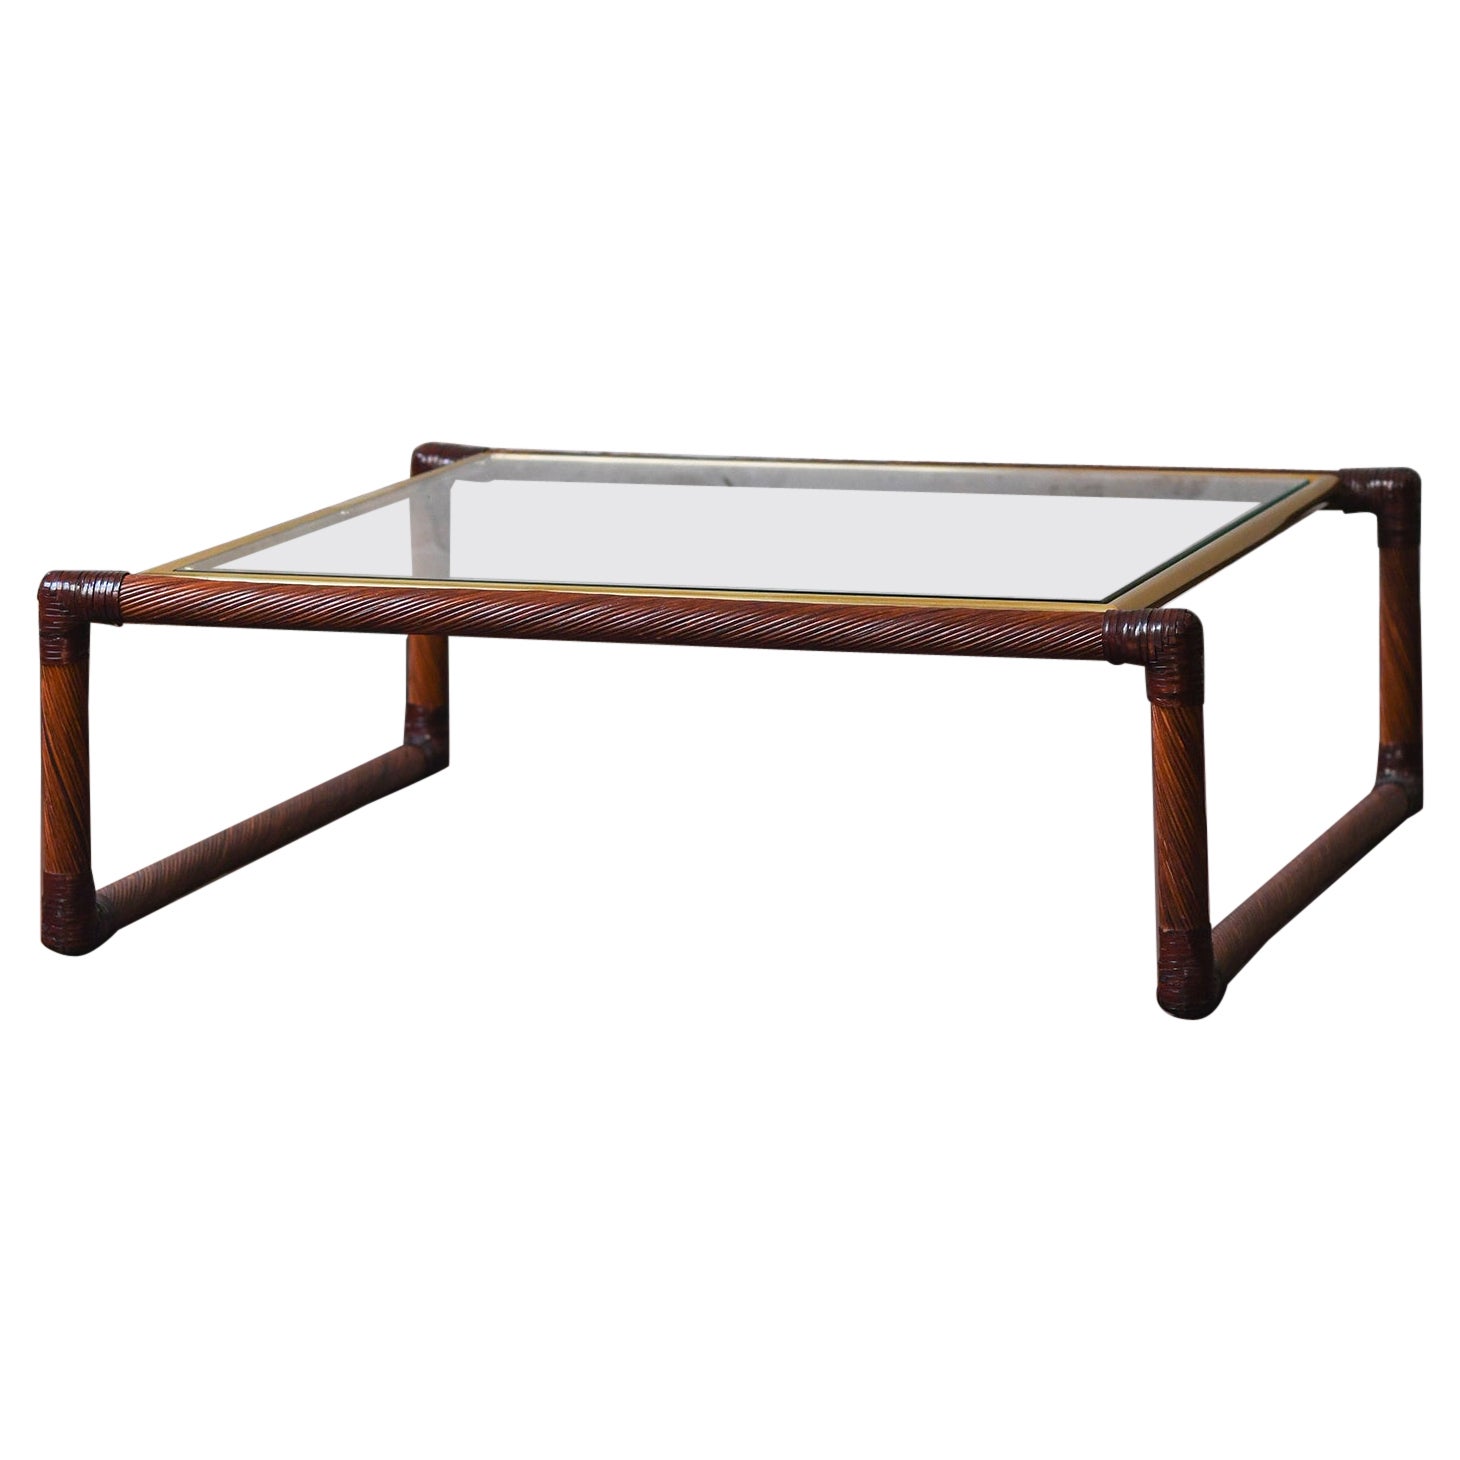 Rattan coffee table with leather bindings, brass details and glass top, 1970s For Sale